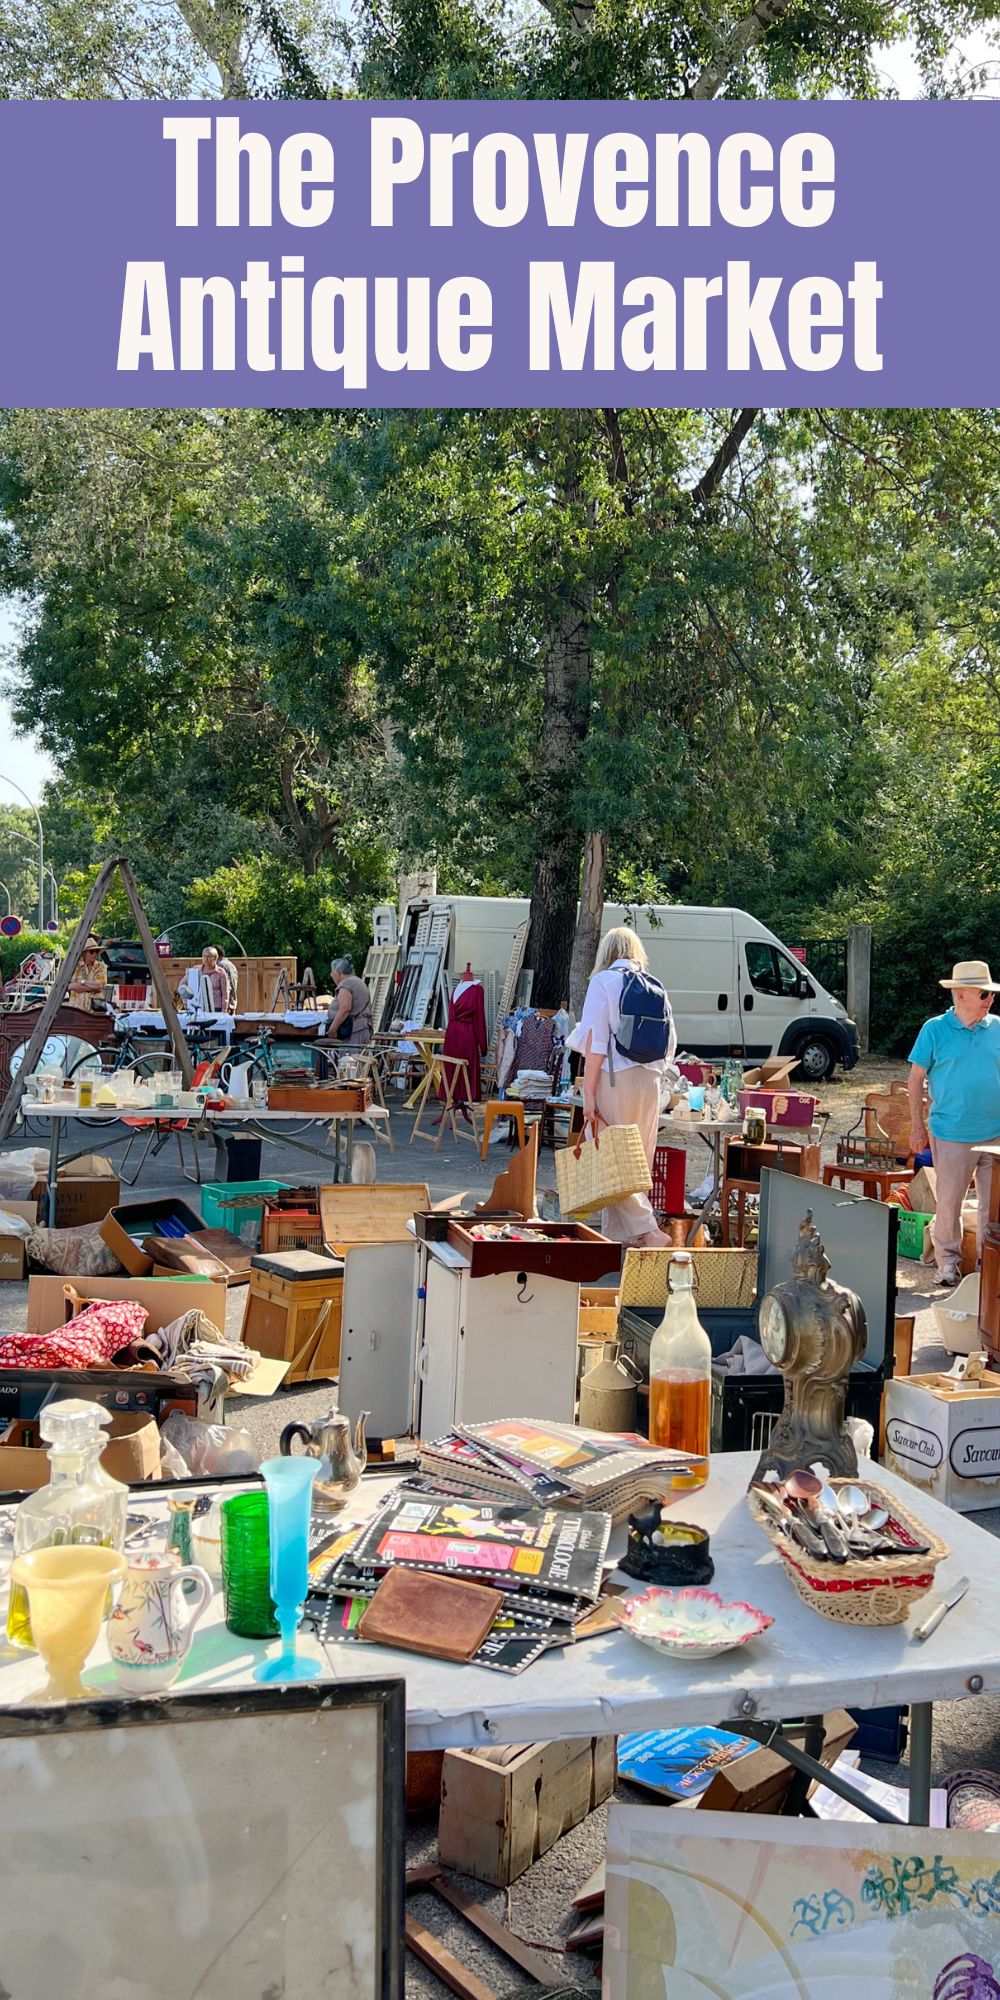 Today we went to our first large Provence Antique Market. We found many wonderful items and I found lots of linens and my new favorite item!